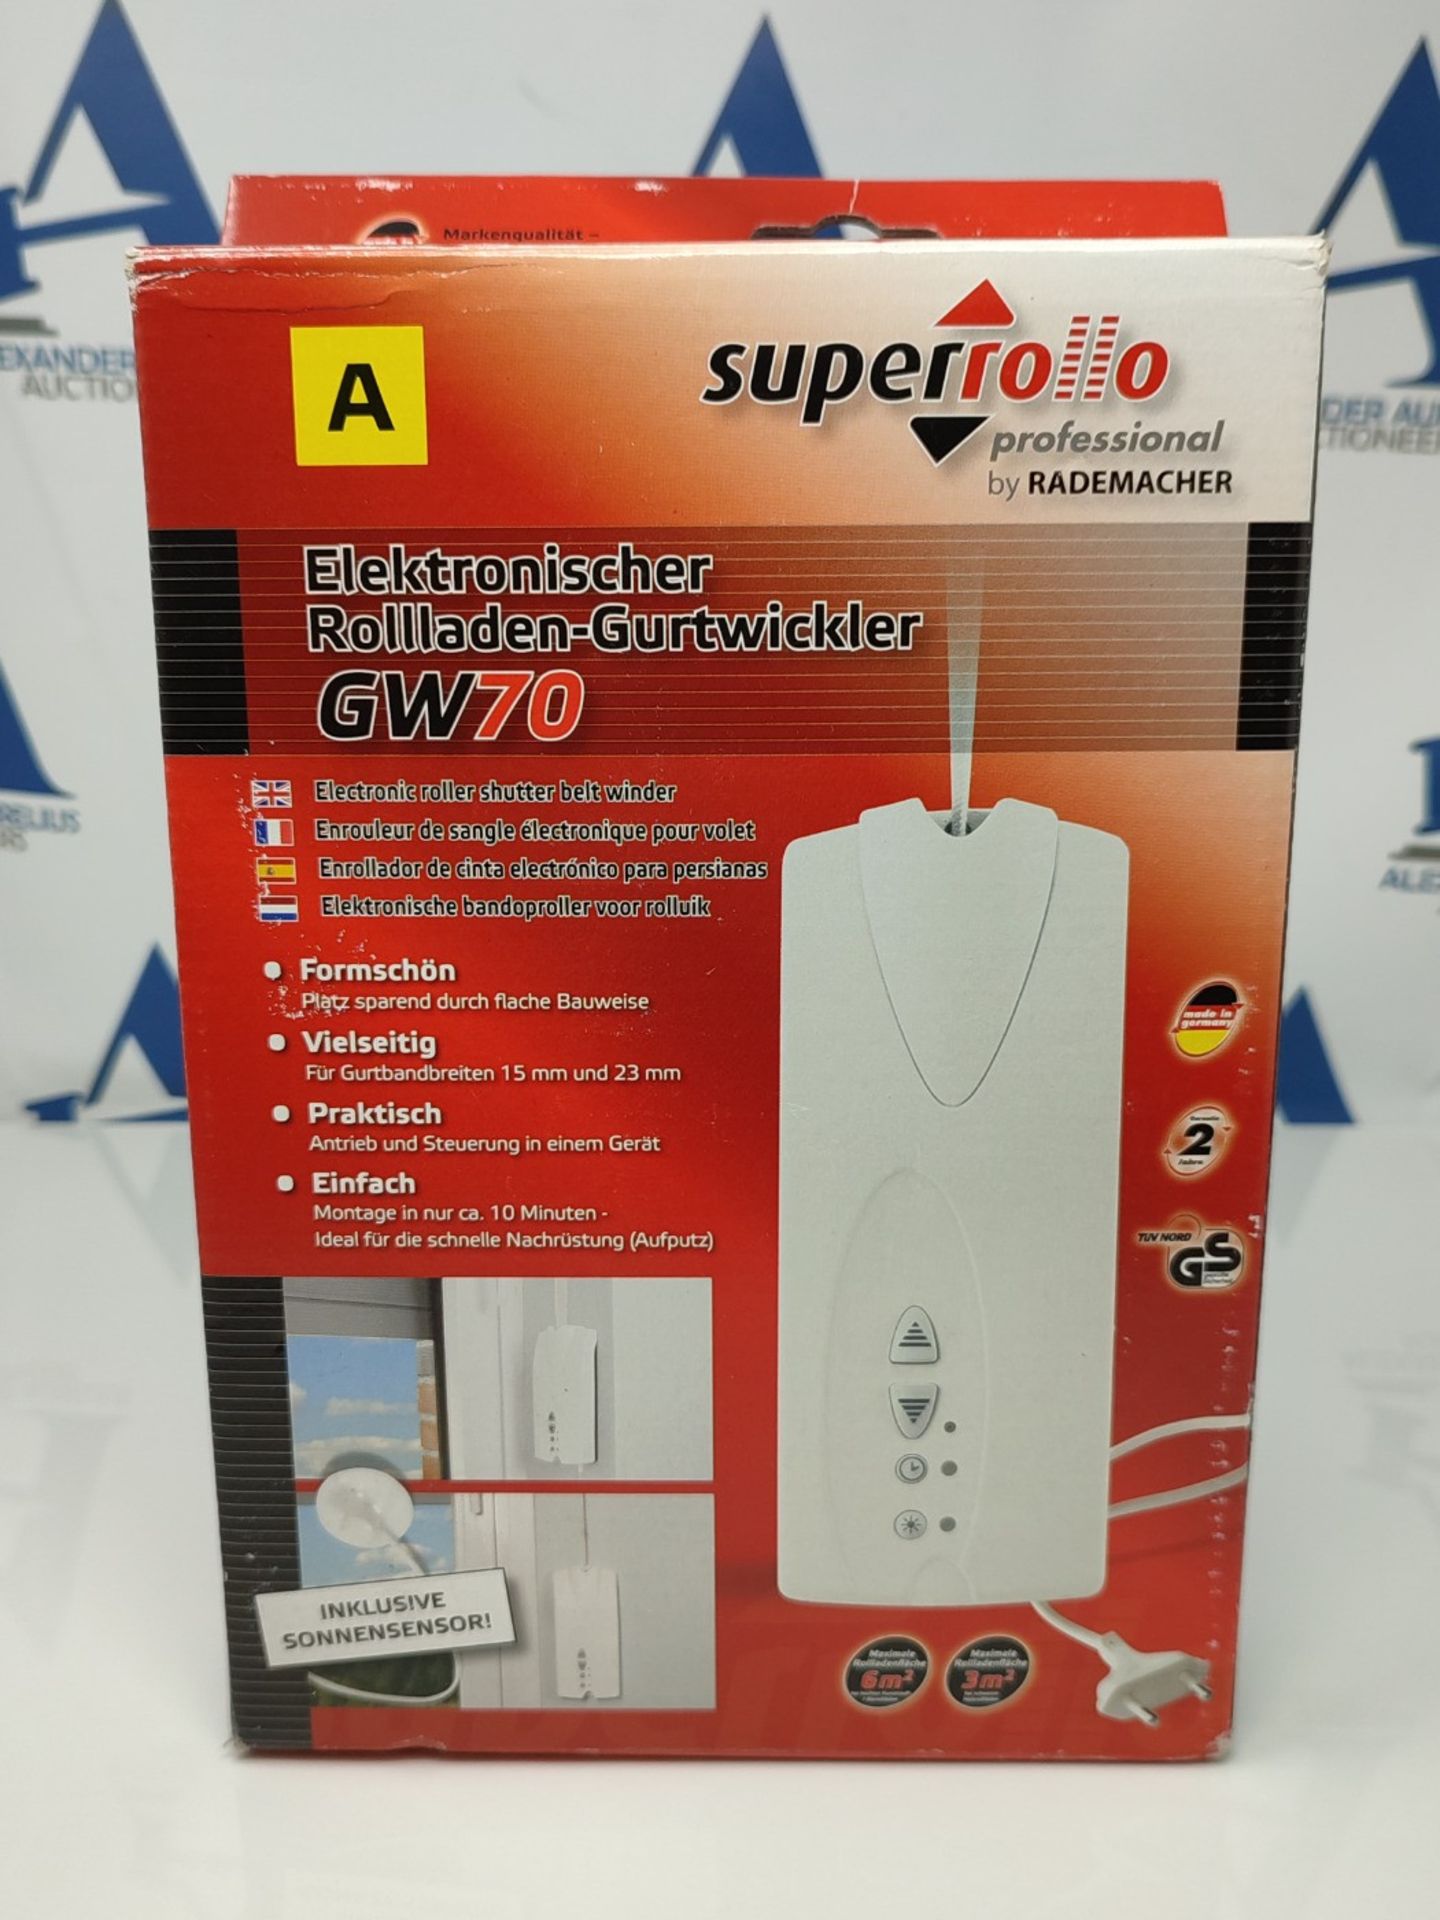 RRP £119.00 SuperRollo Electric Roller Shutter Winder GW70, surface-mounted, includes solar sensor - Image 2 of 3